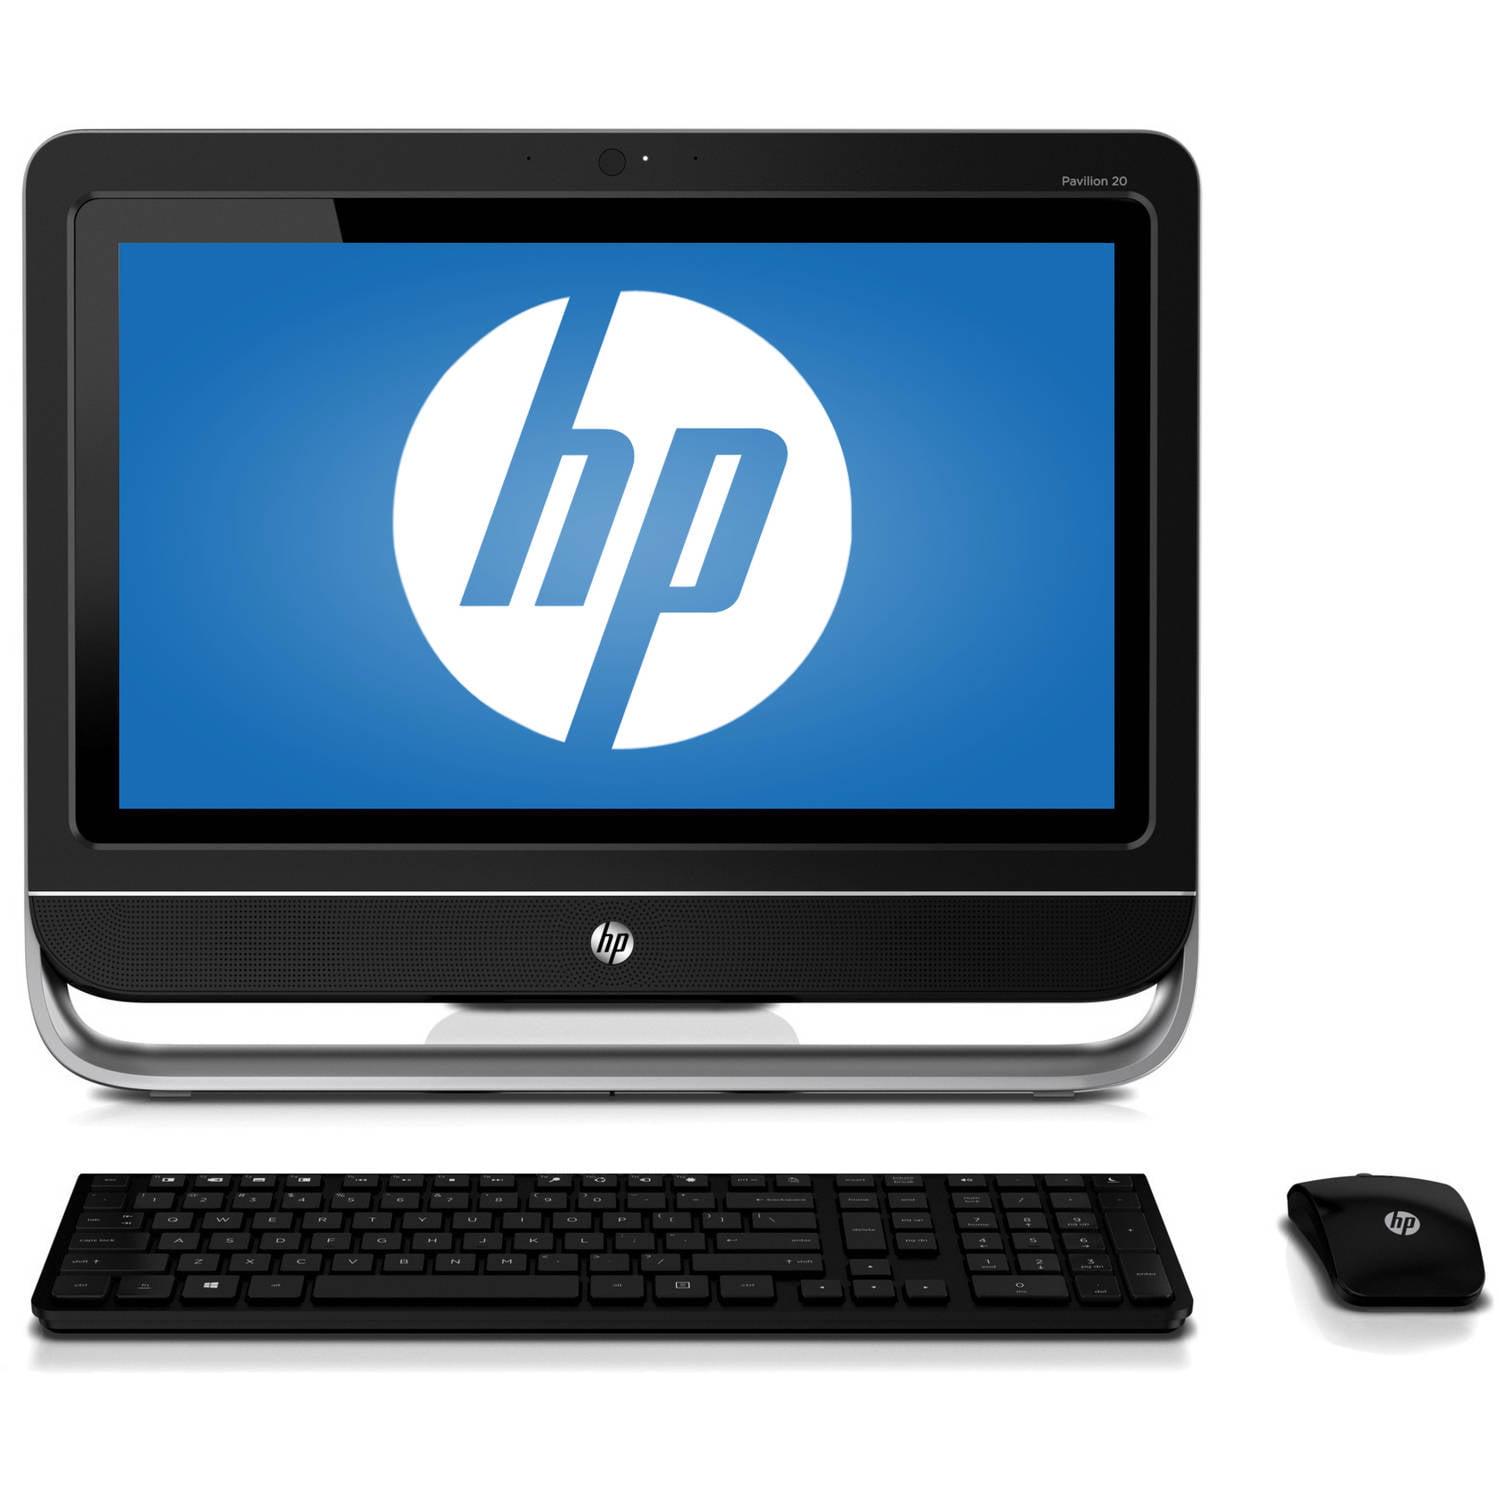 Restored HP Pavilion 20-b323w All-in-One Desktop PC with AMD E1